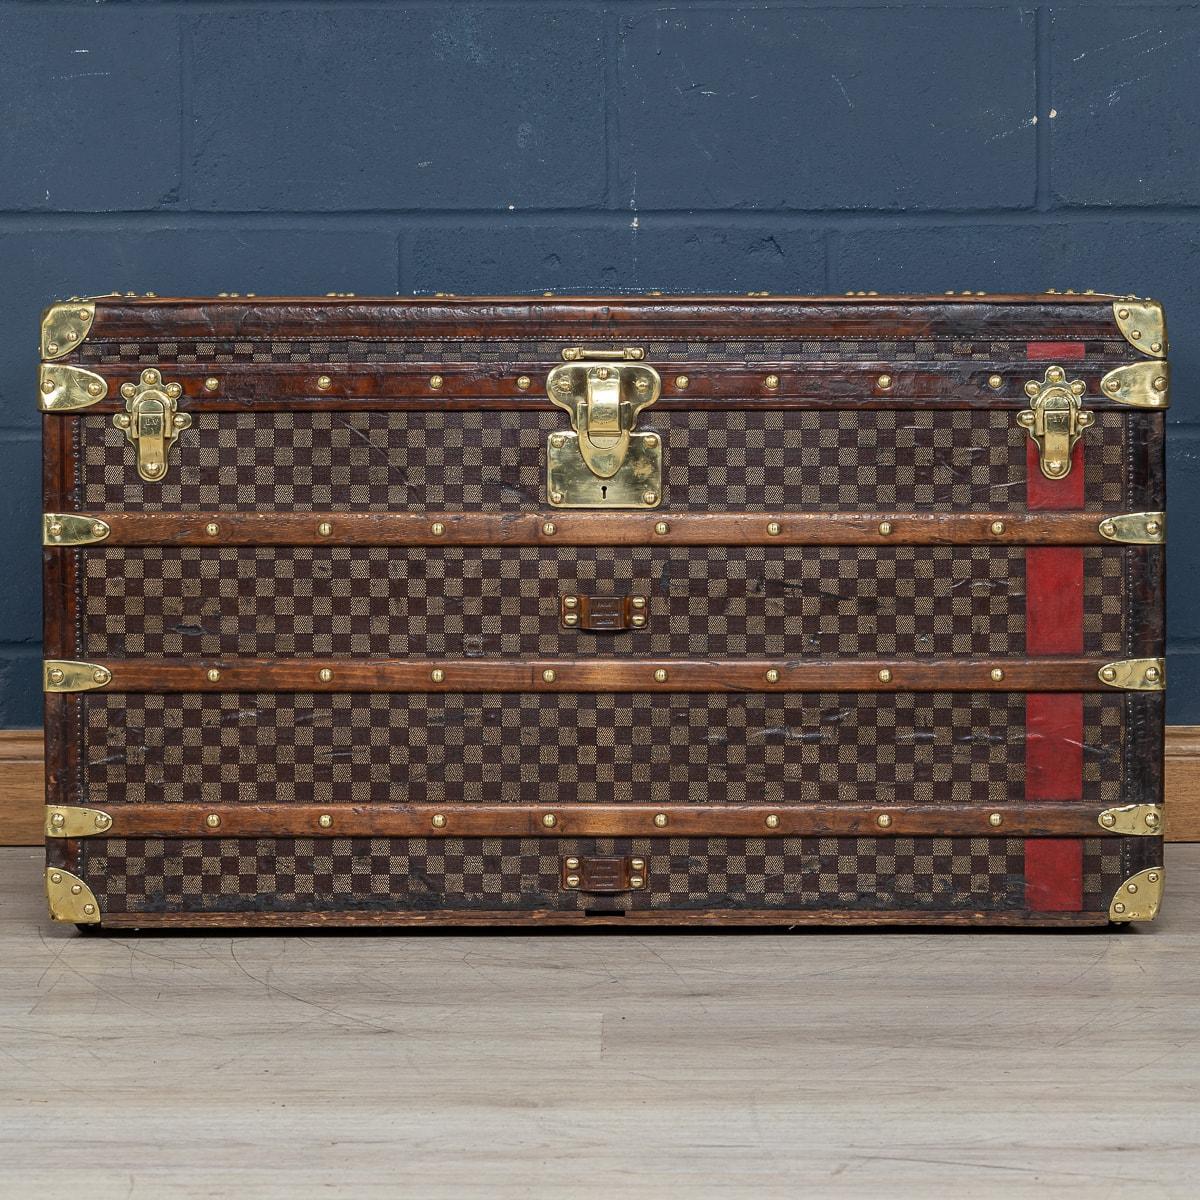 One of the rarer Louis Vuitton trunks to be offered, this trunk is covered in the world famous damier (checkerboard) canvas. Dating to around 1900, it is a wonderful example of such trunks. With its leather trim, brass studs, fittings and locks it